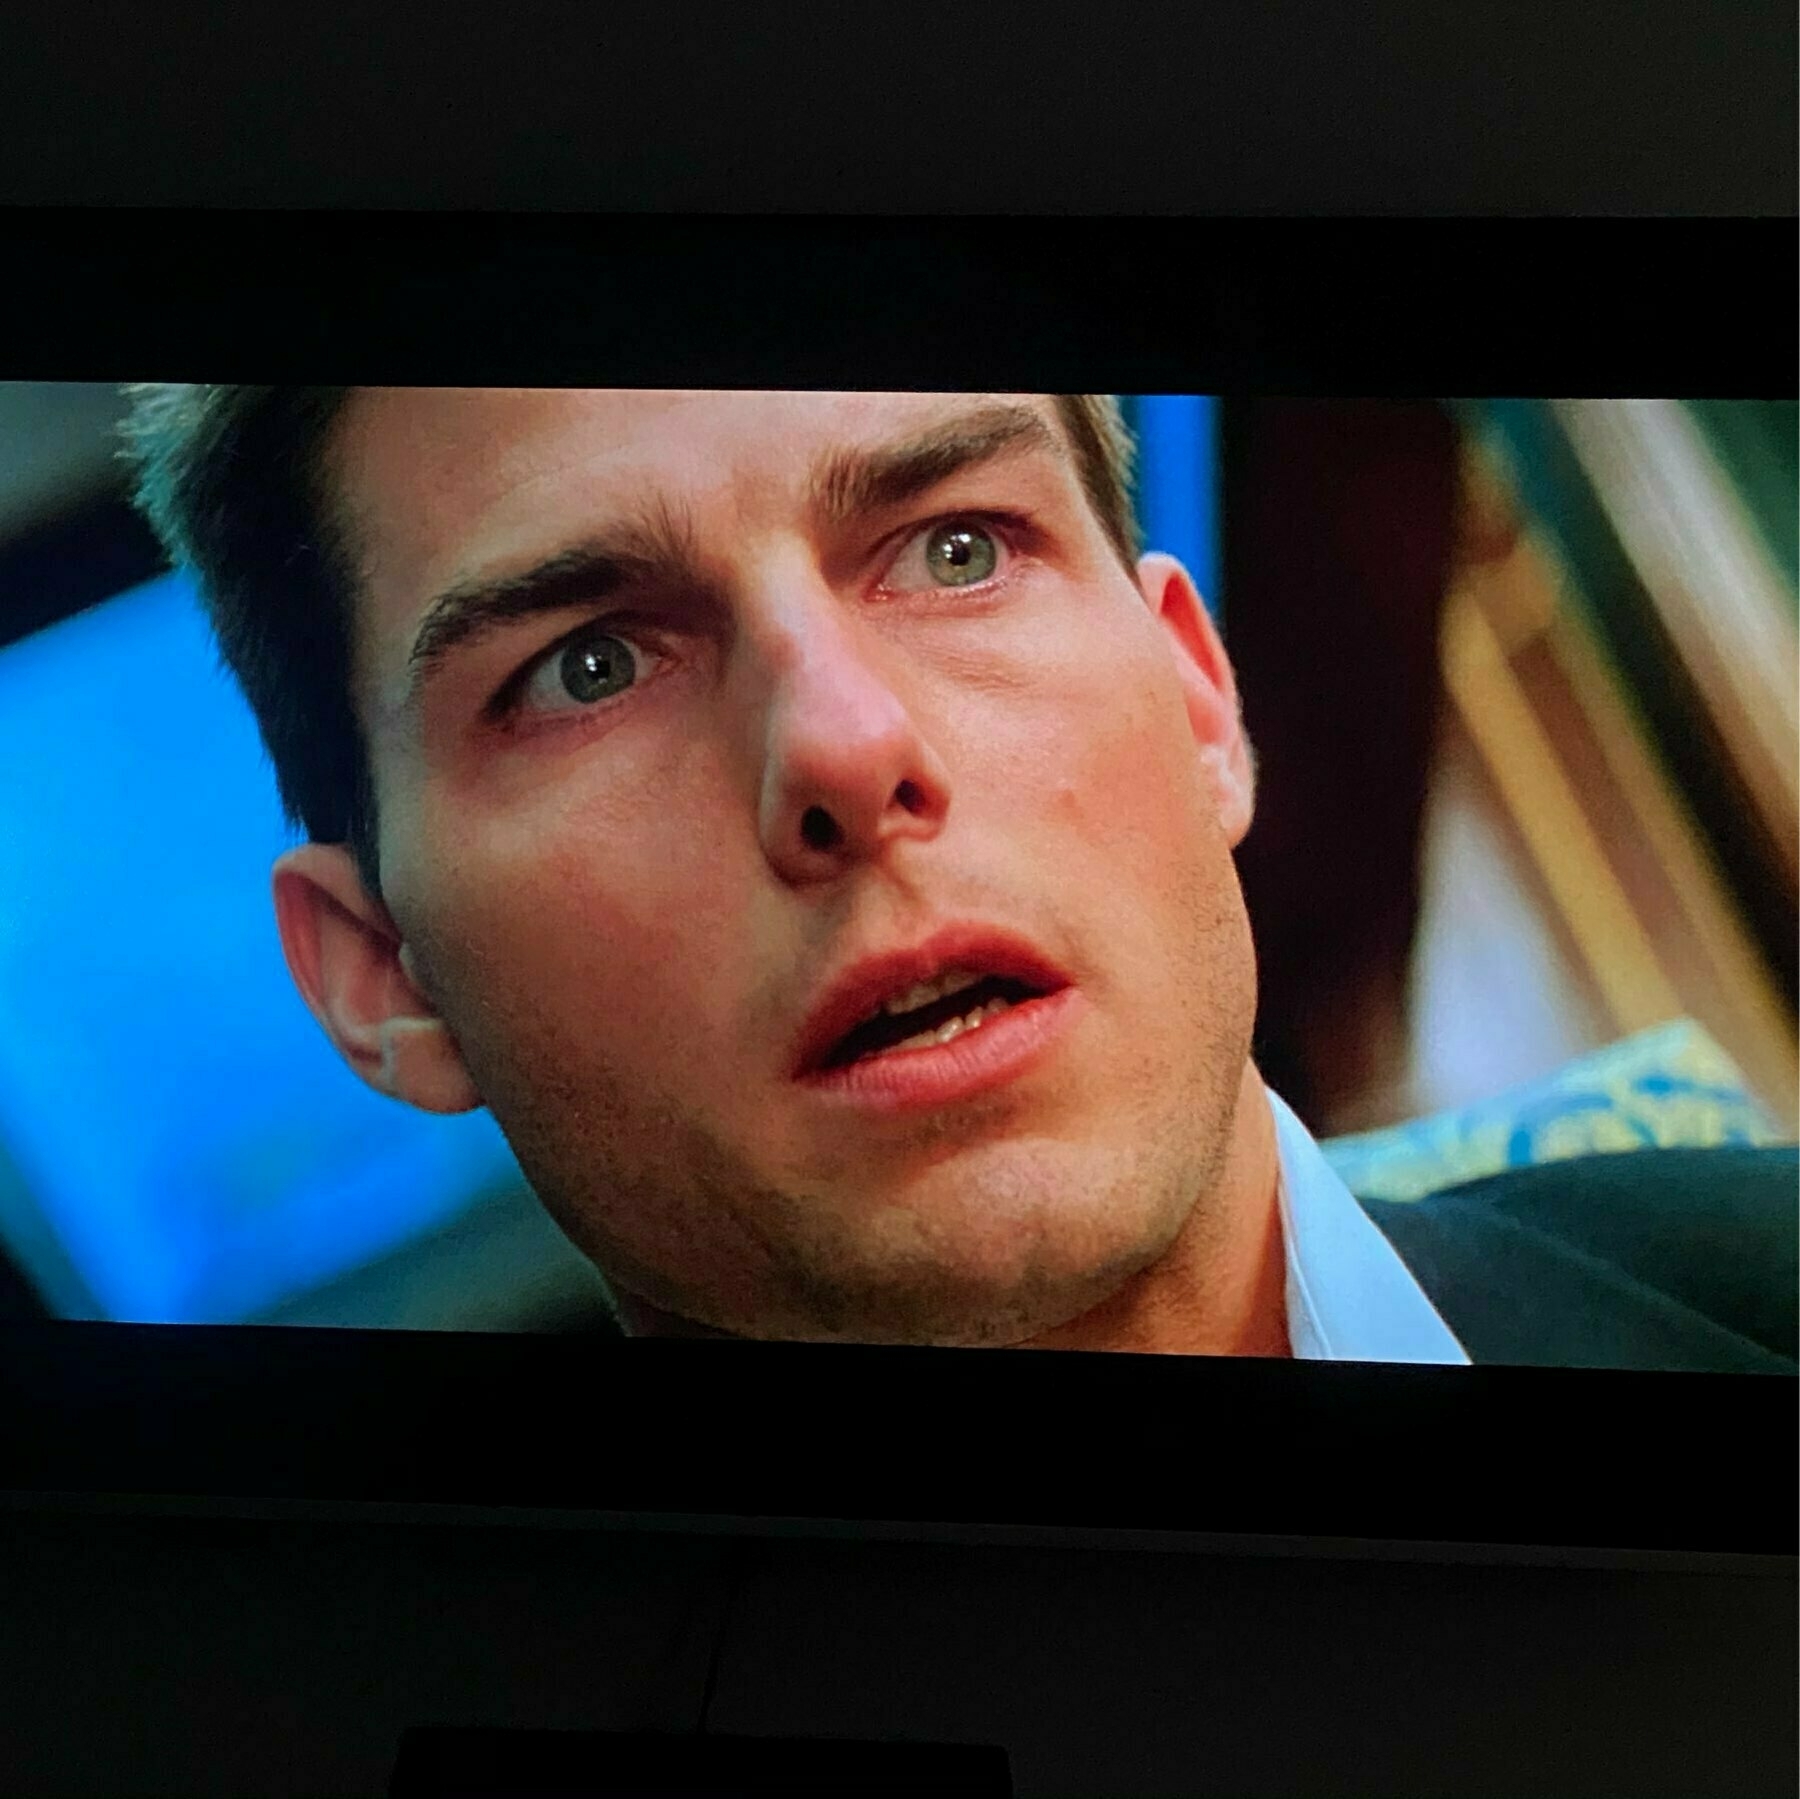 Actor Tom Cruise on screen